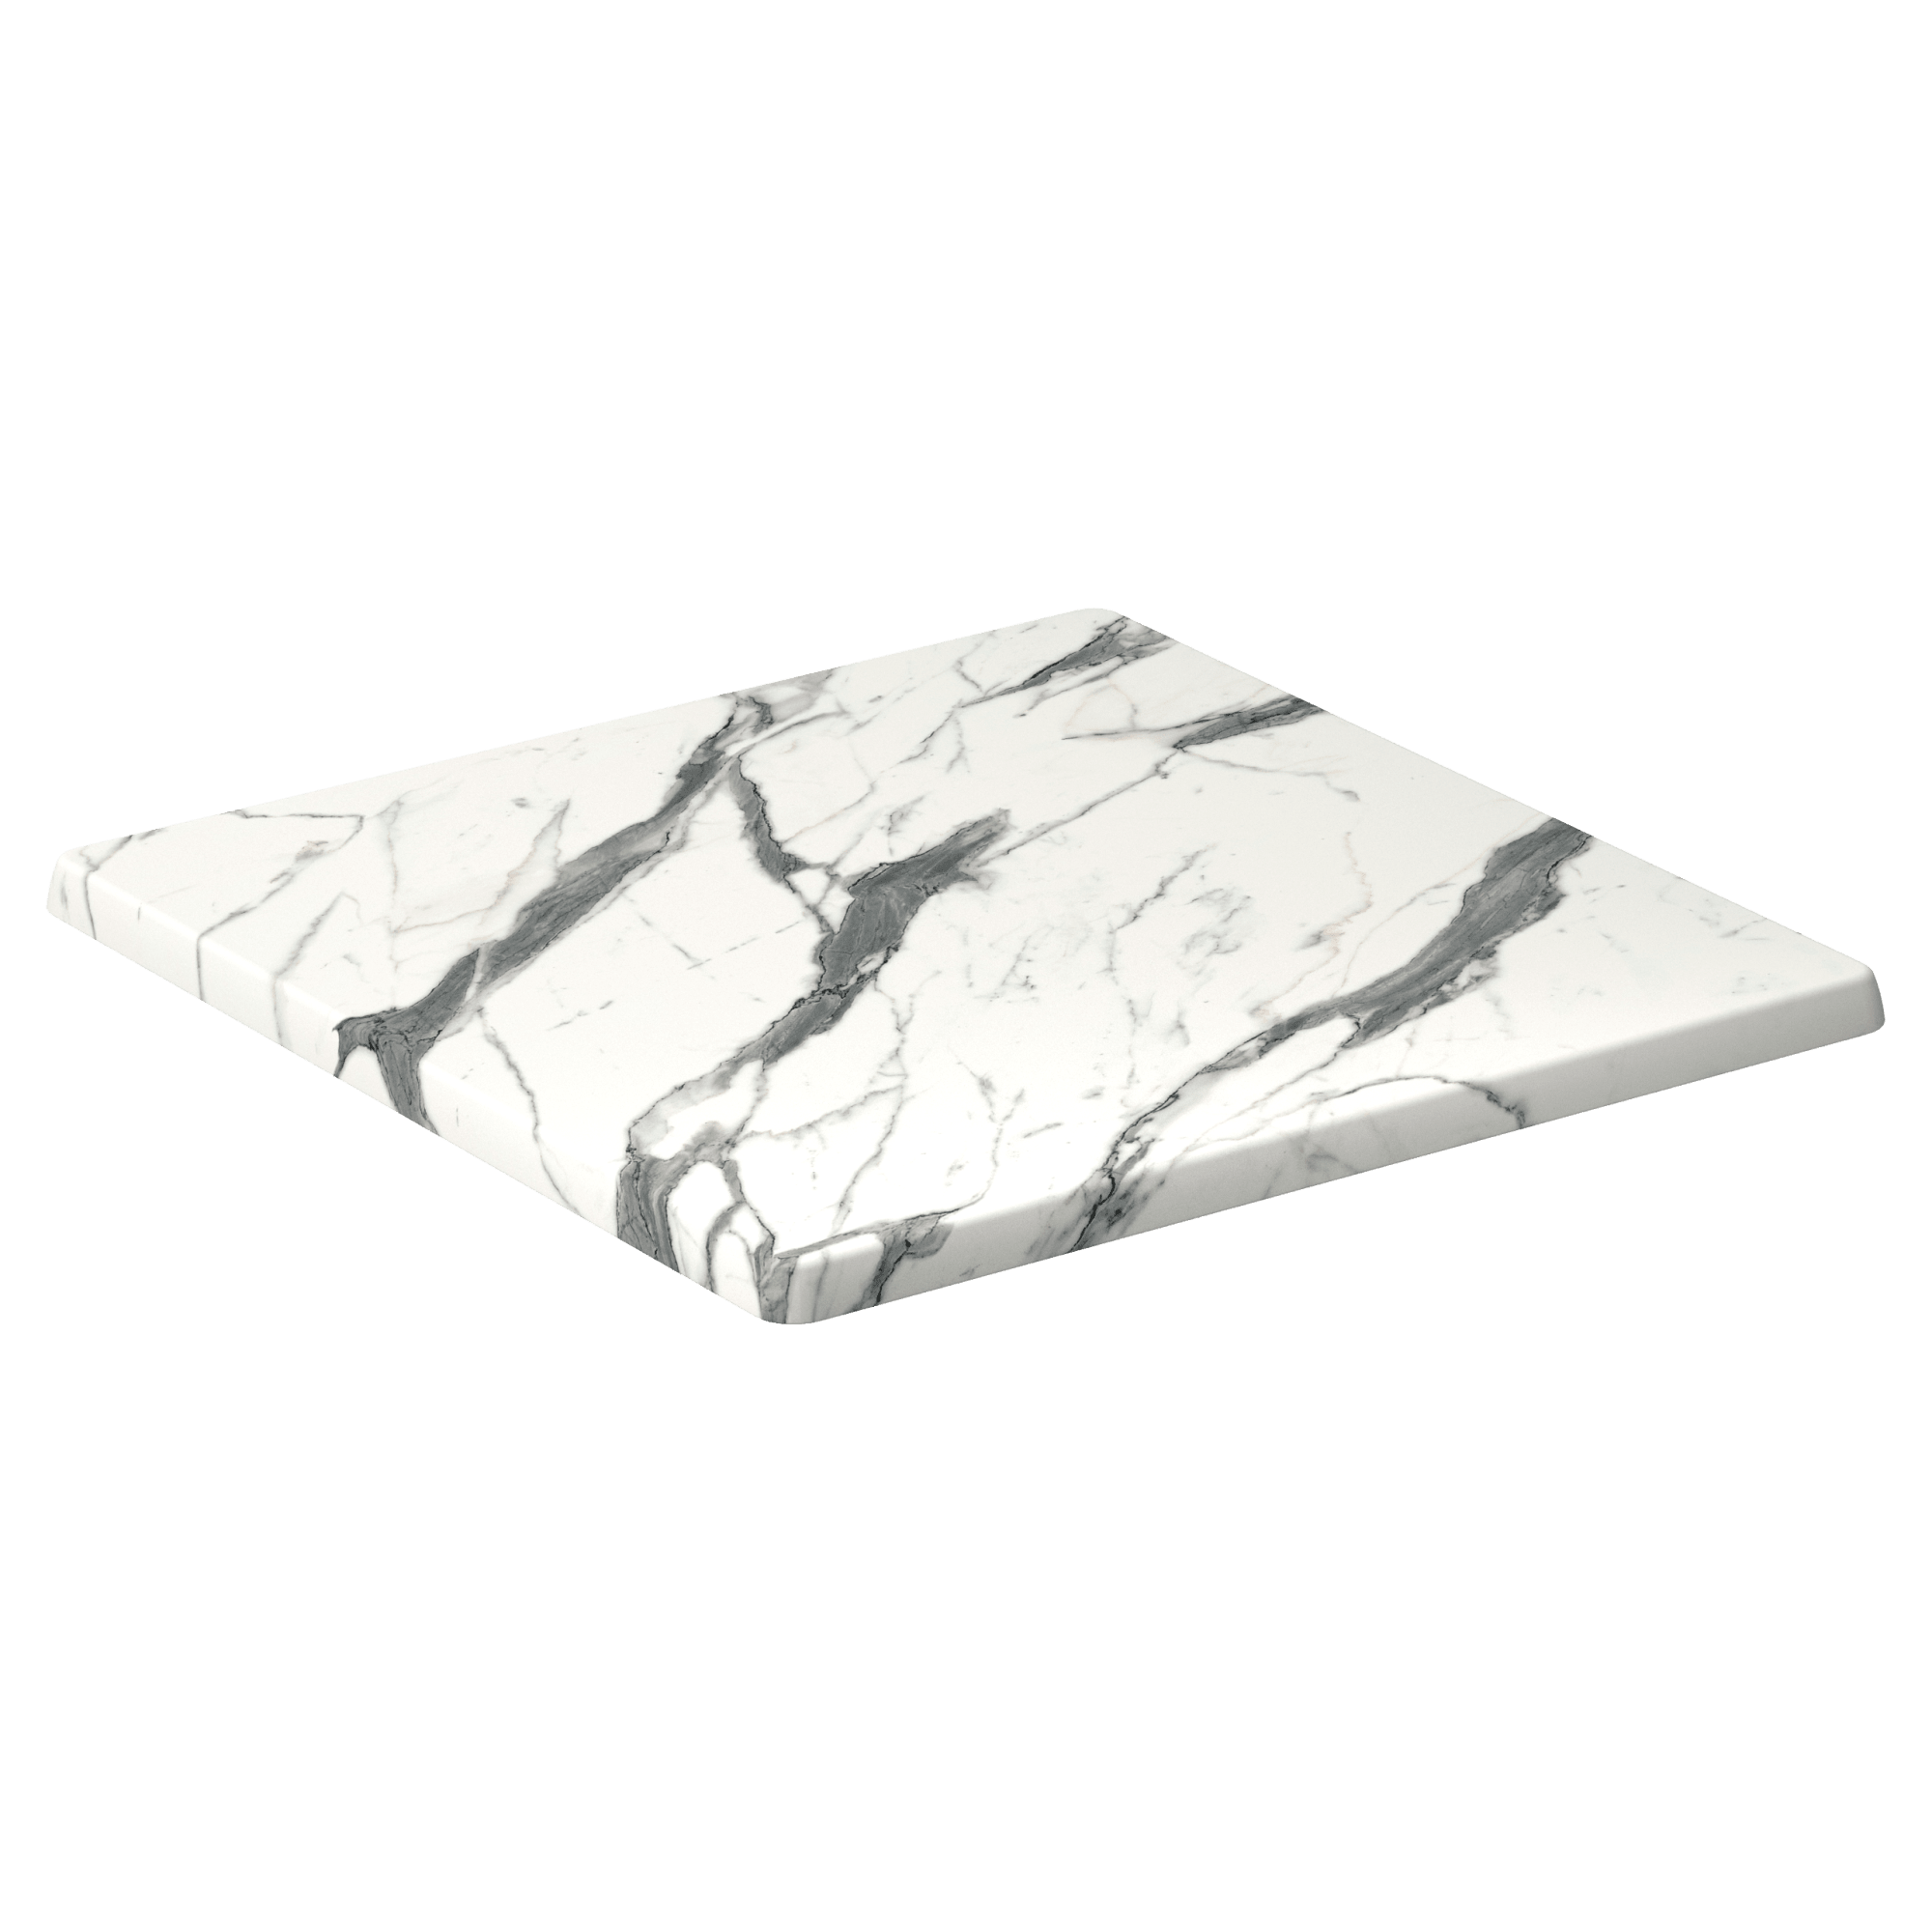 Resin Table Top in Light Marble Finish with Resin Table Top in Light Marble Finish